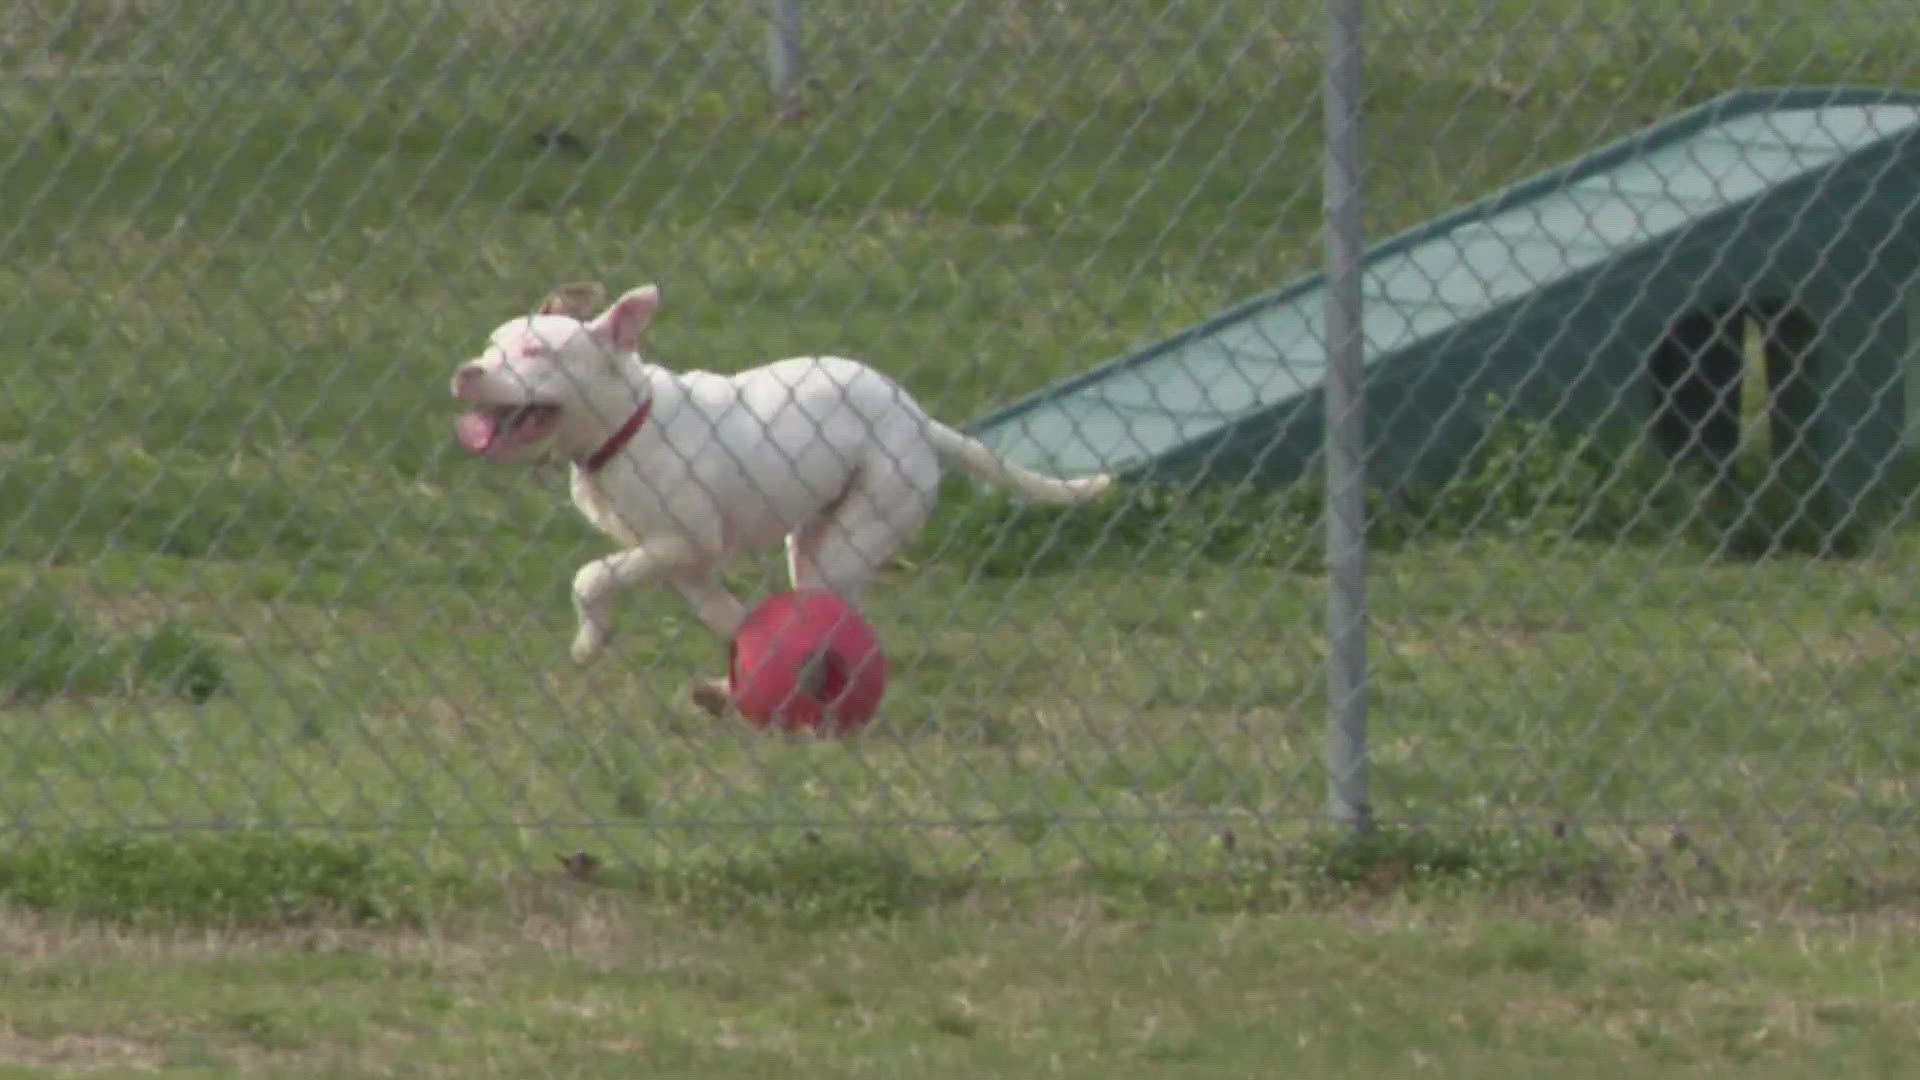 Animal rescuers are working to beat a deadline for euthanizing at least 8 dogs that are out of time at the county's animal shelter.